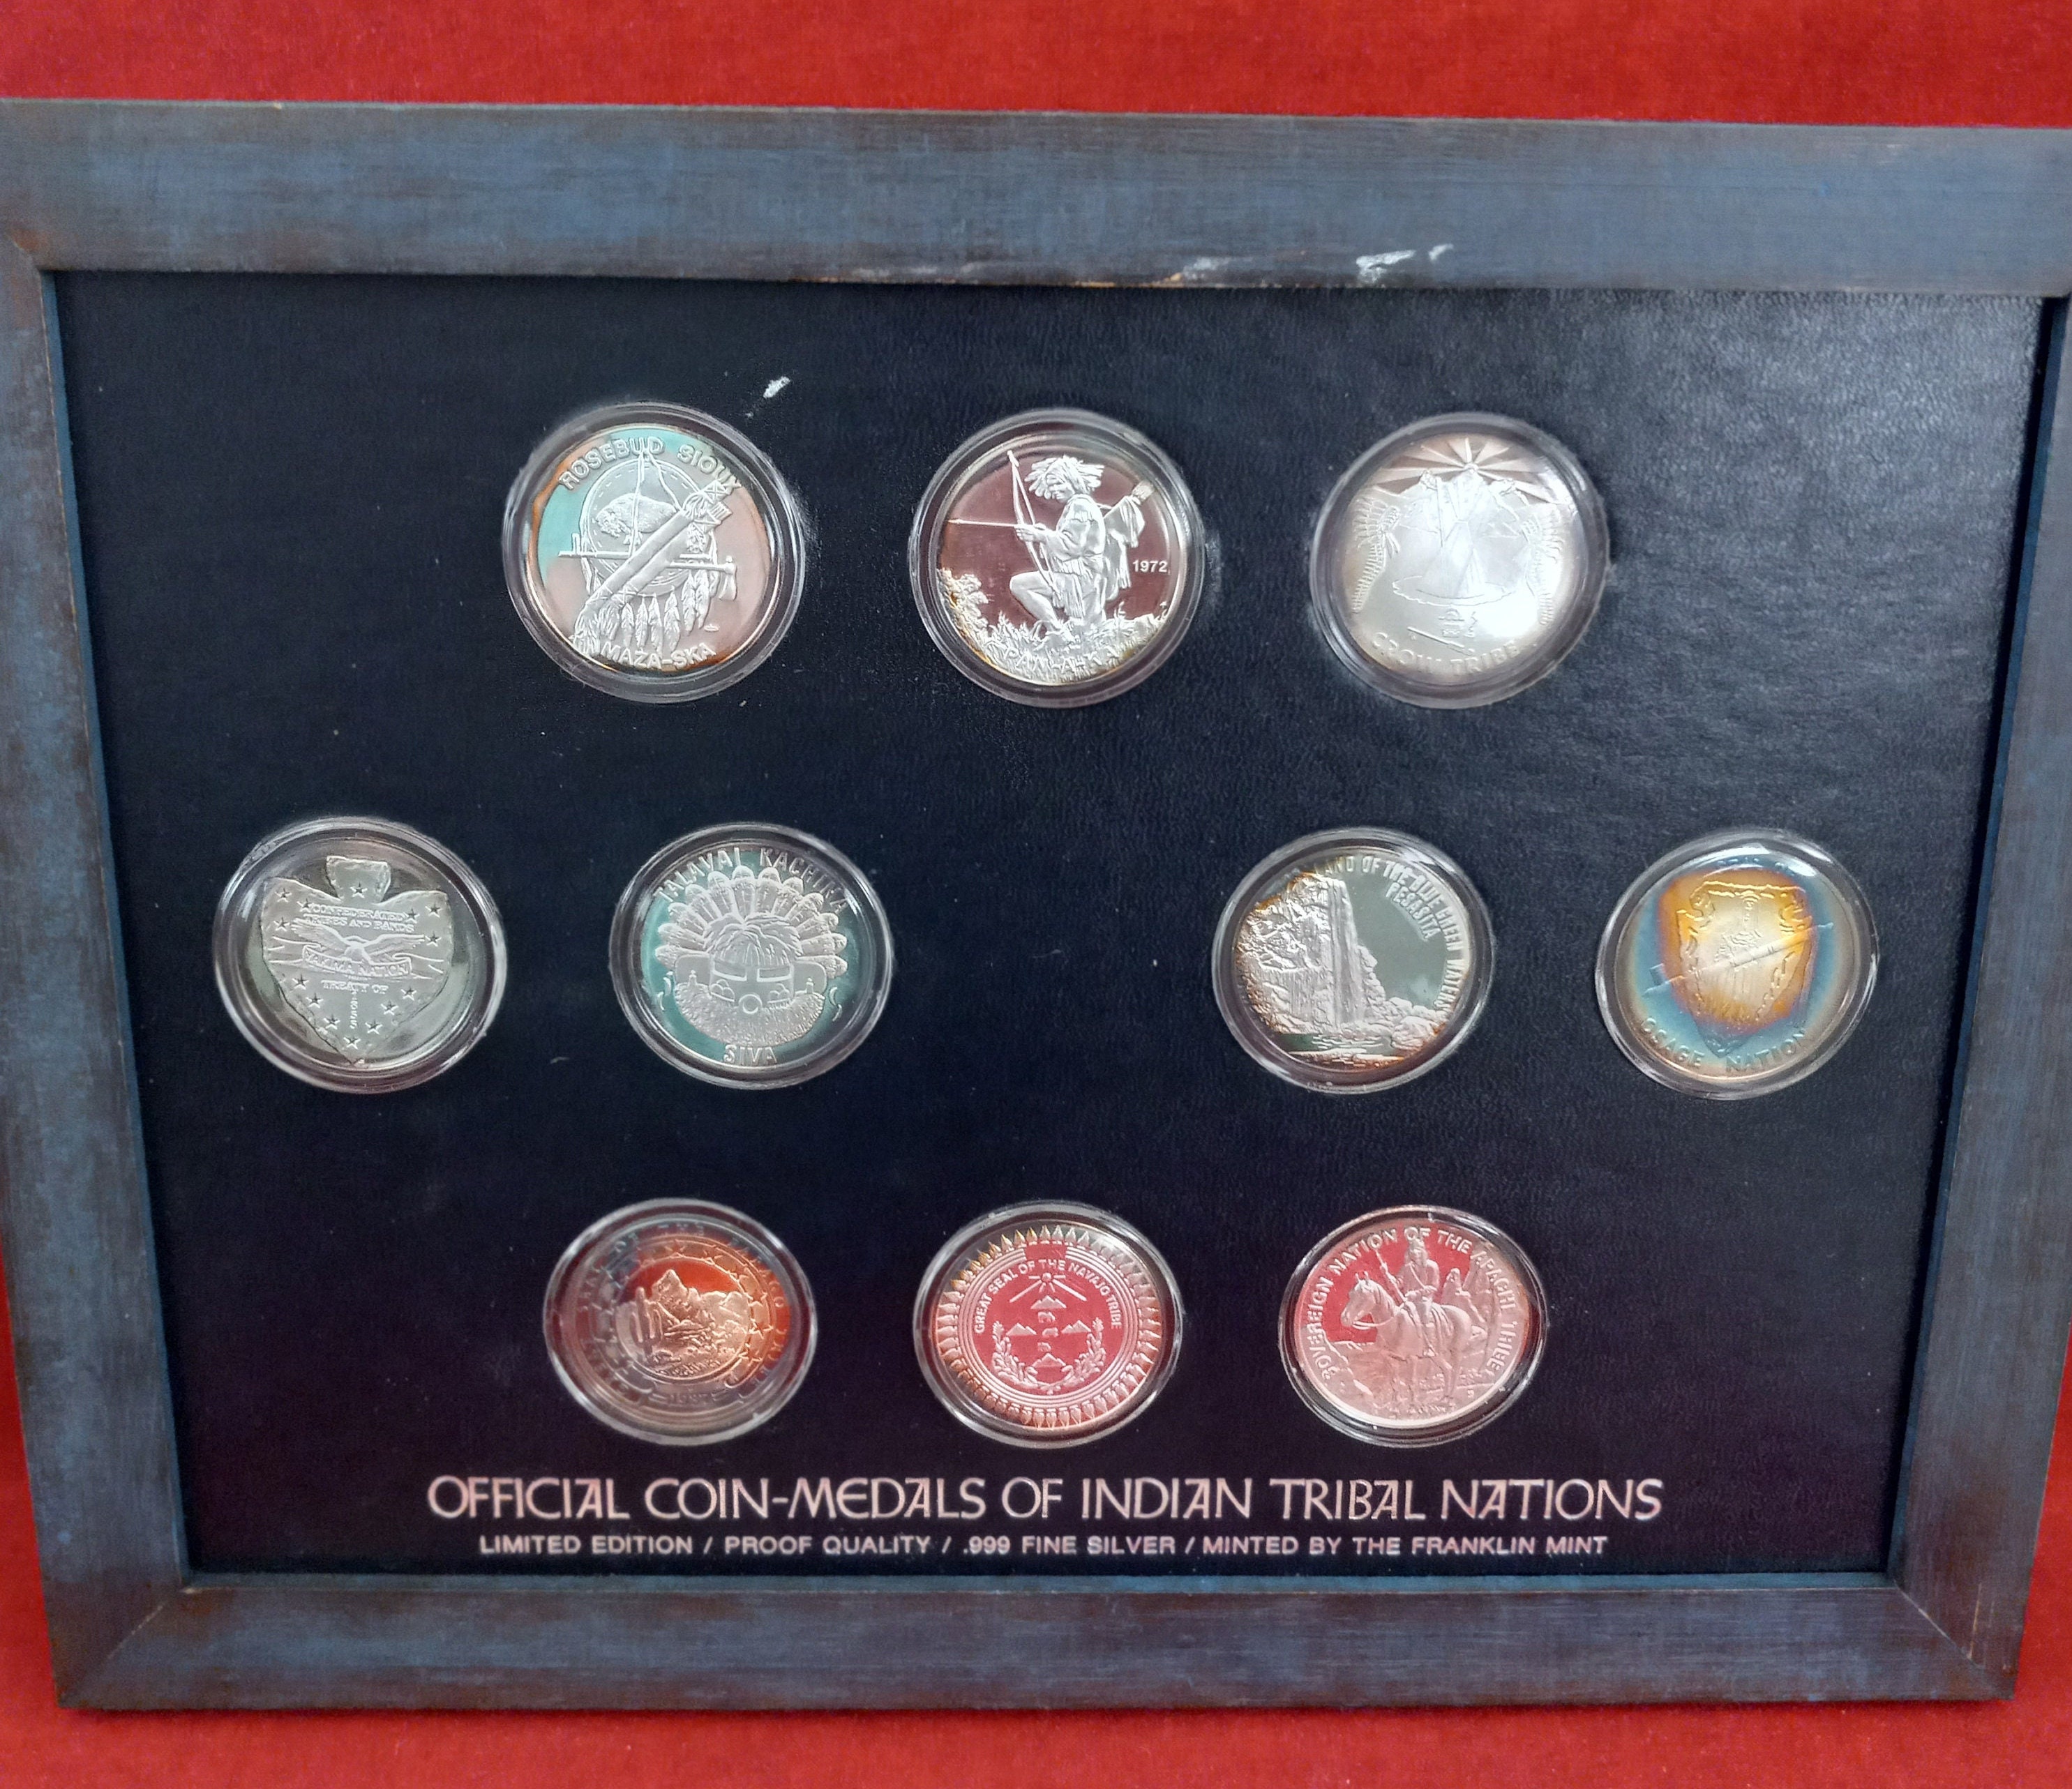 Sold at Auction: Franklin Mint - Coin-Medals of Indian Tribal Nations -  VOLUME 4, Set 2